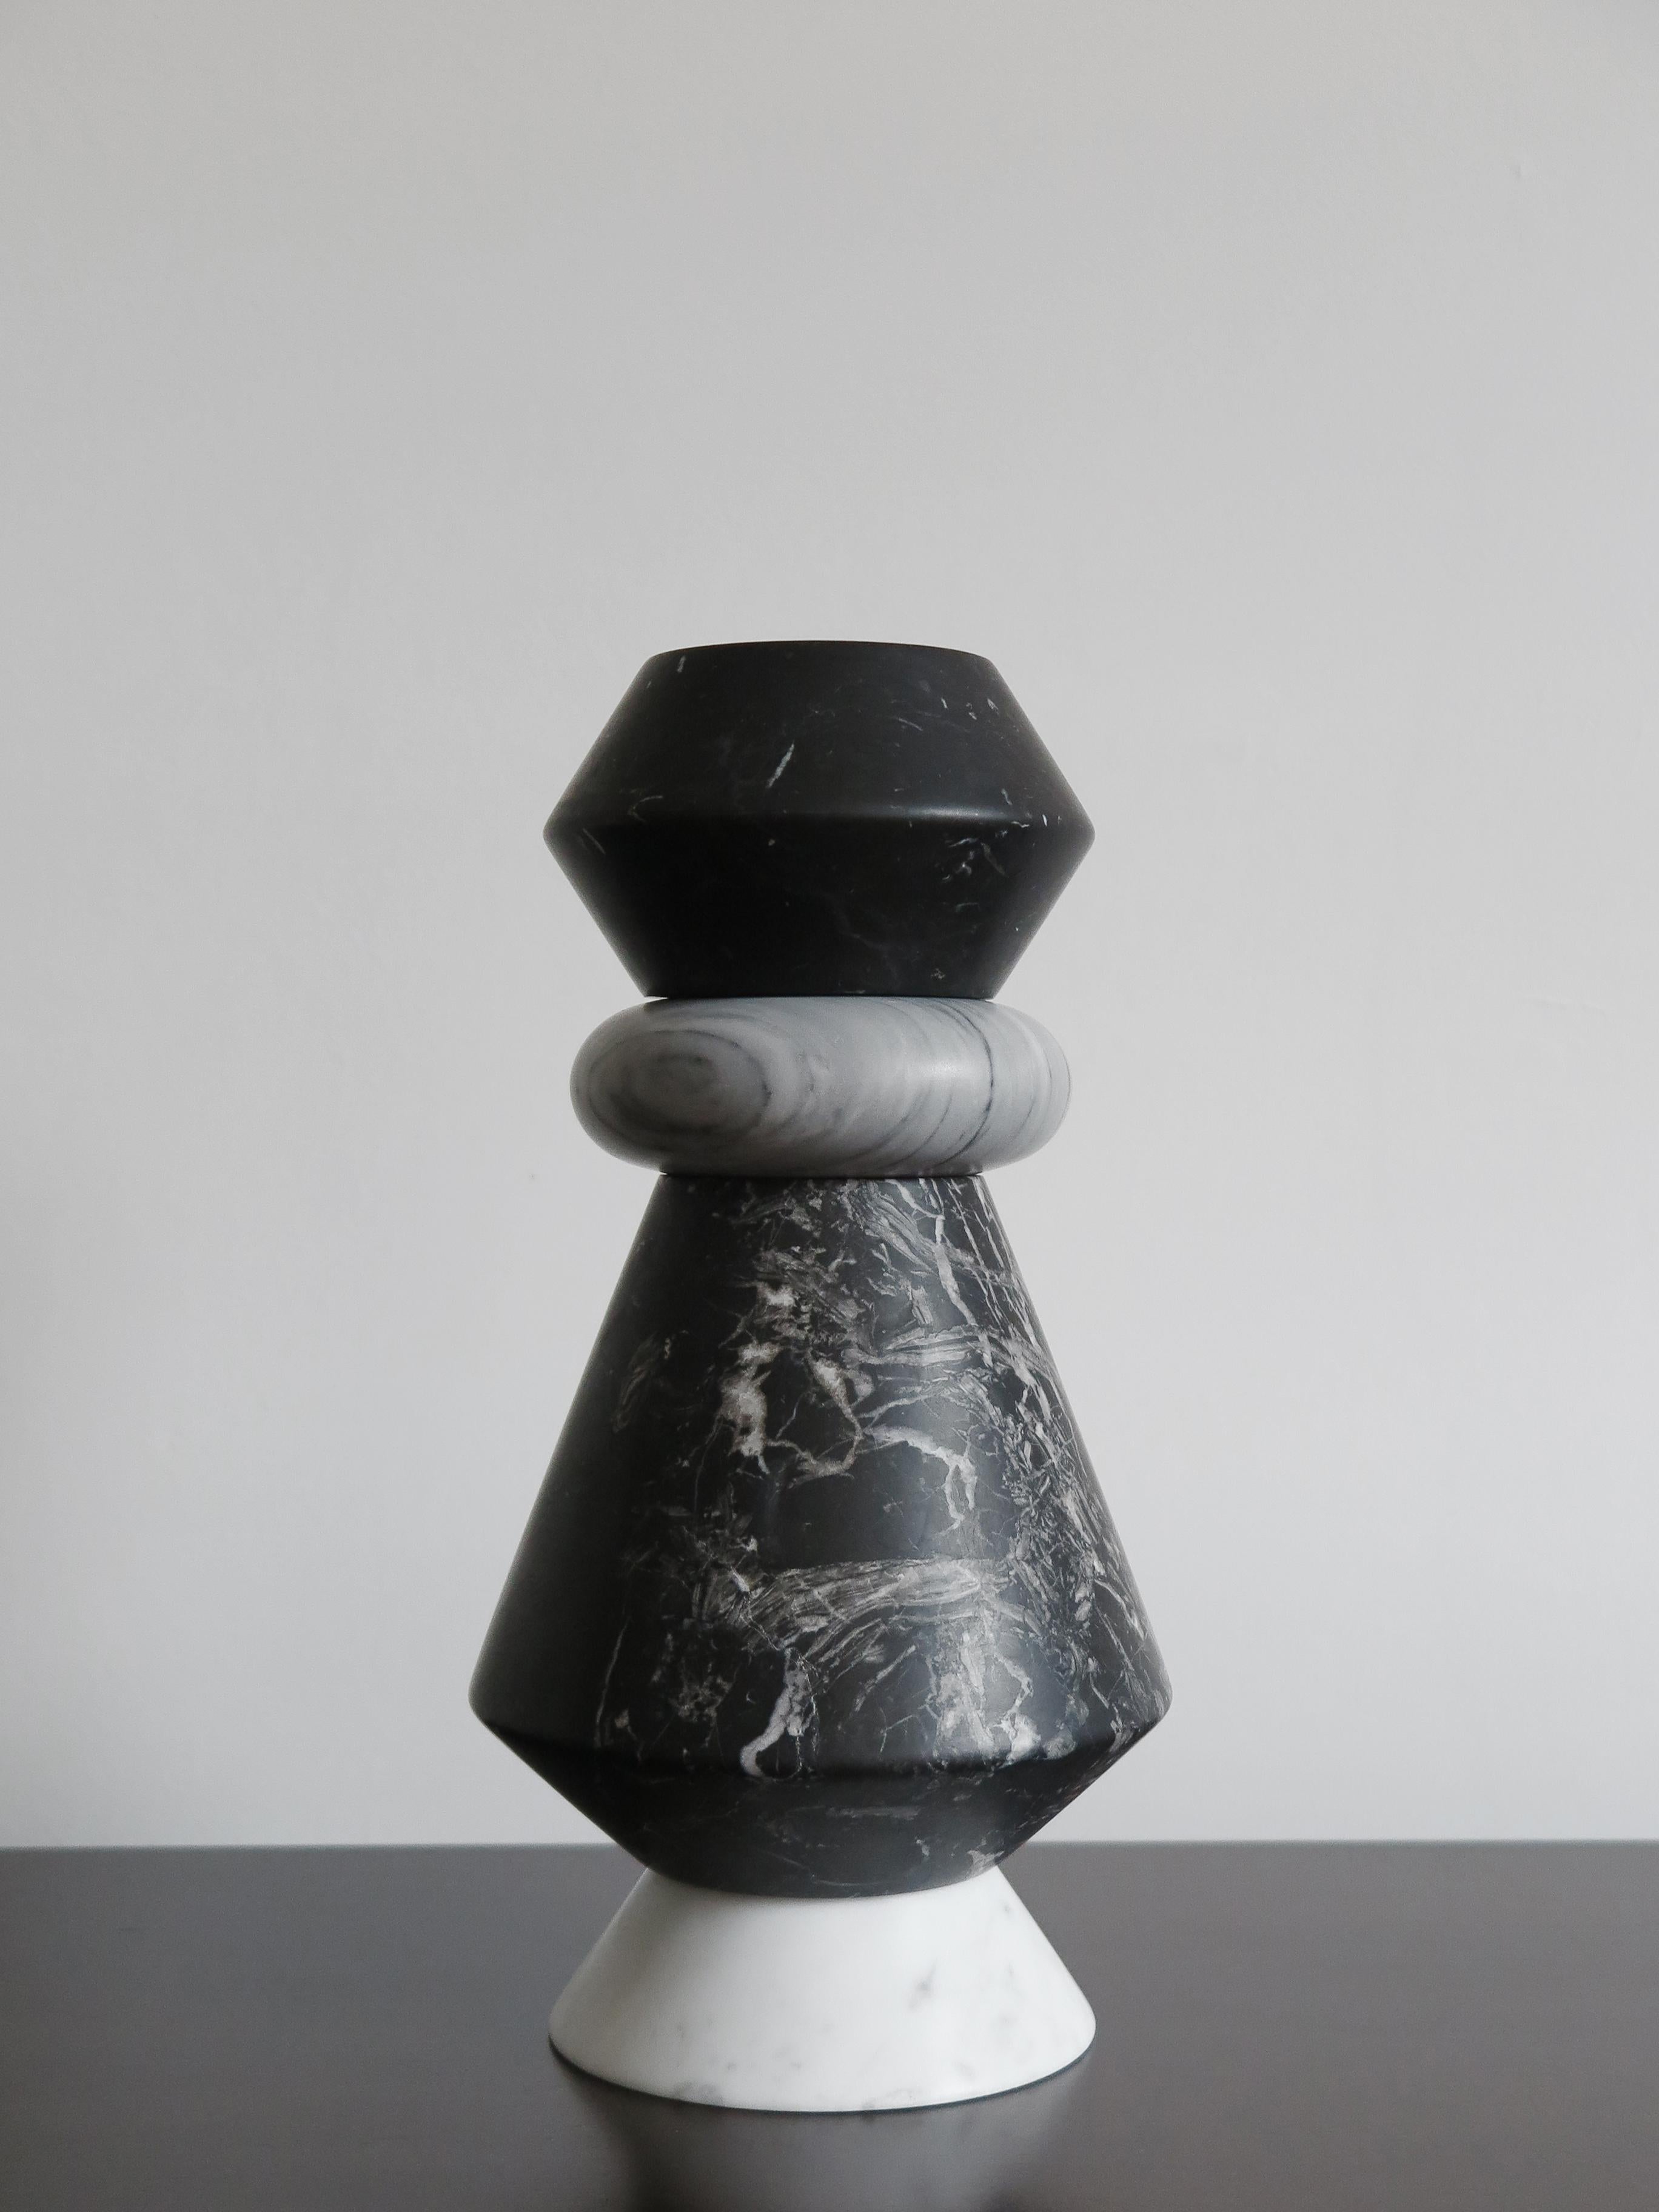 Large sculpture, candleholder and flower vase, modular as you like made up of
various marbles:
Carrara White, Black Marquinia, Bardiglio Gray with including glass tube for fresh flowers.
New design Capperidicasa

Designed for large,